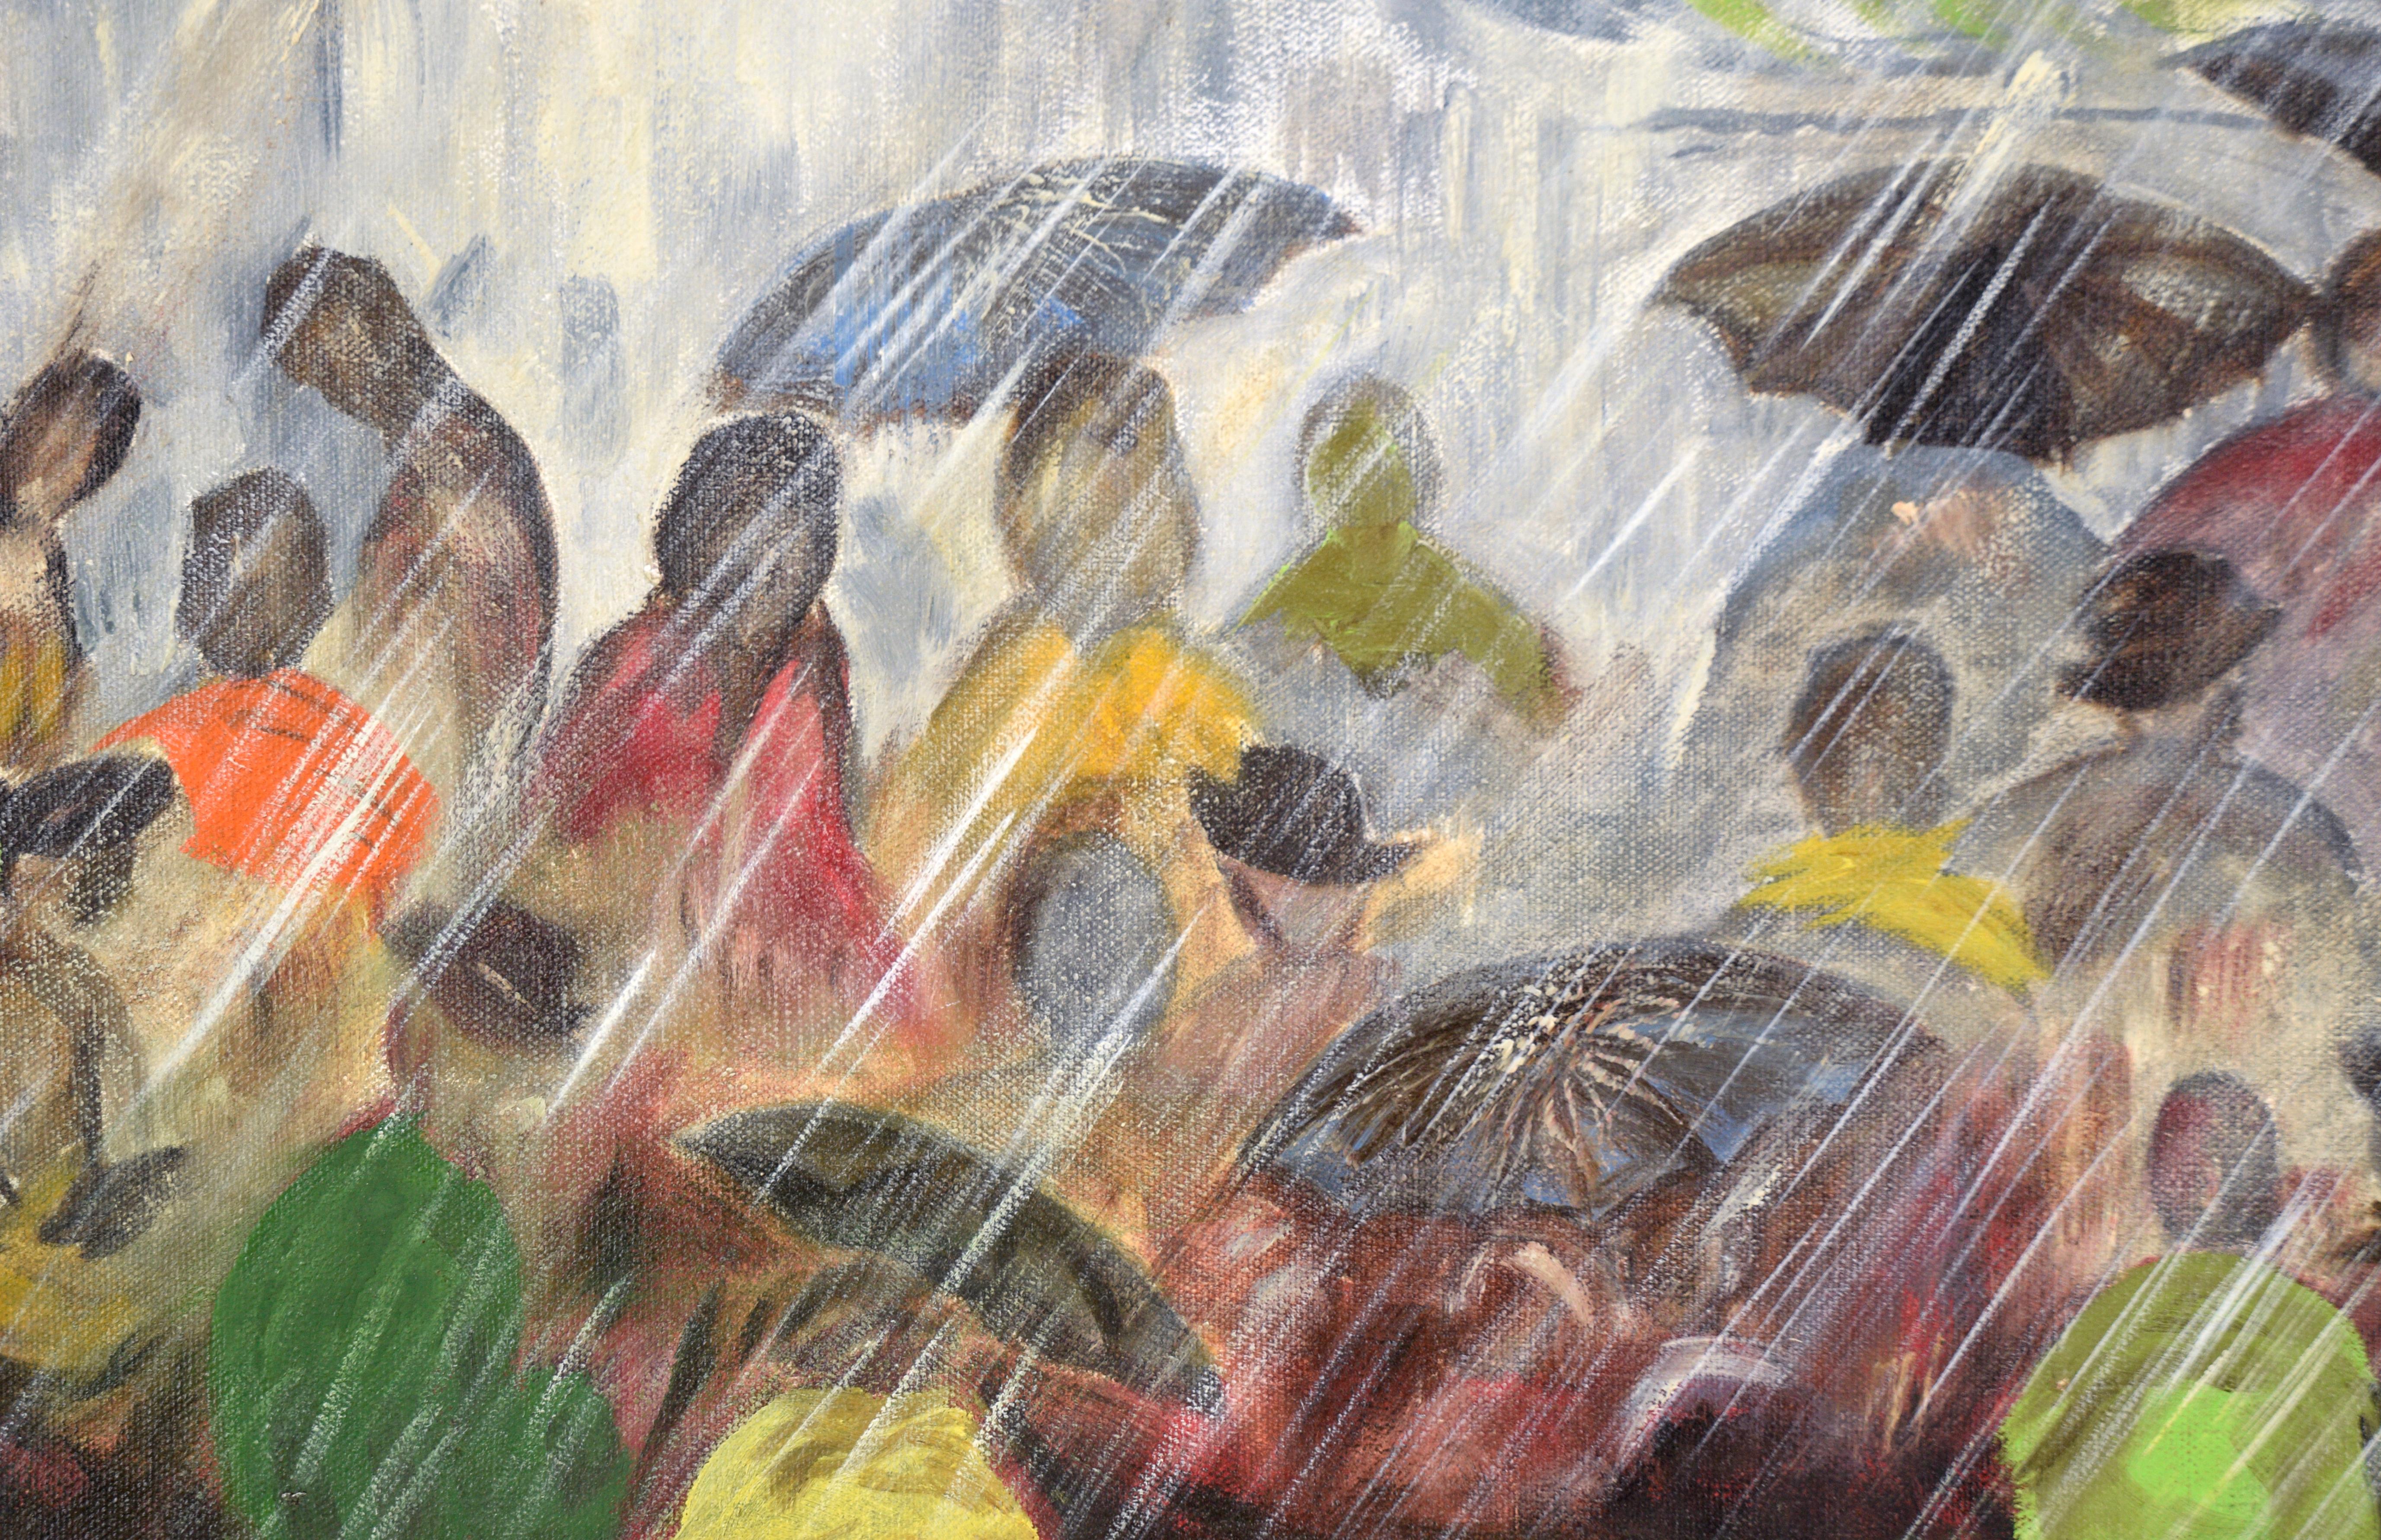 Pouring Down in the Streets - Paysage urbain pluvieux - Gris Figurative Painting par Unknown